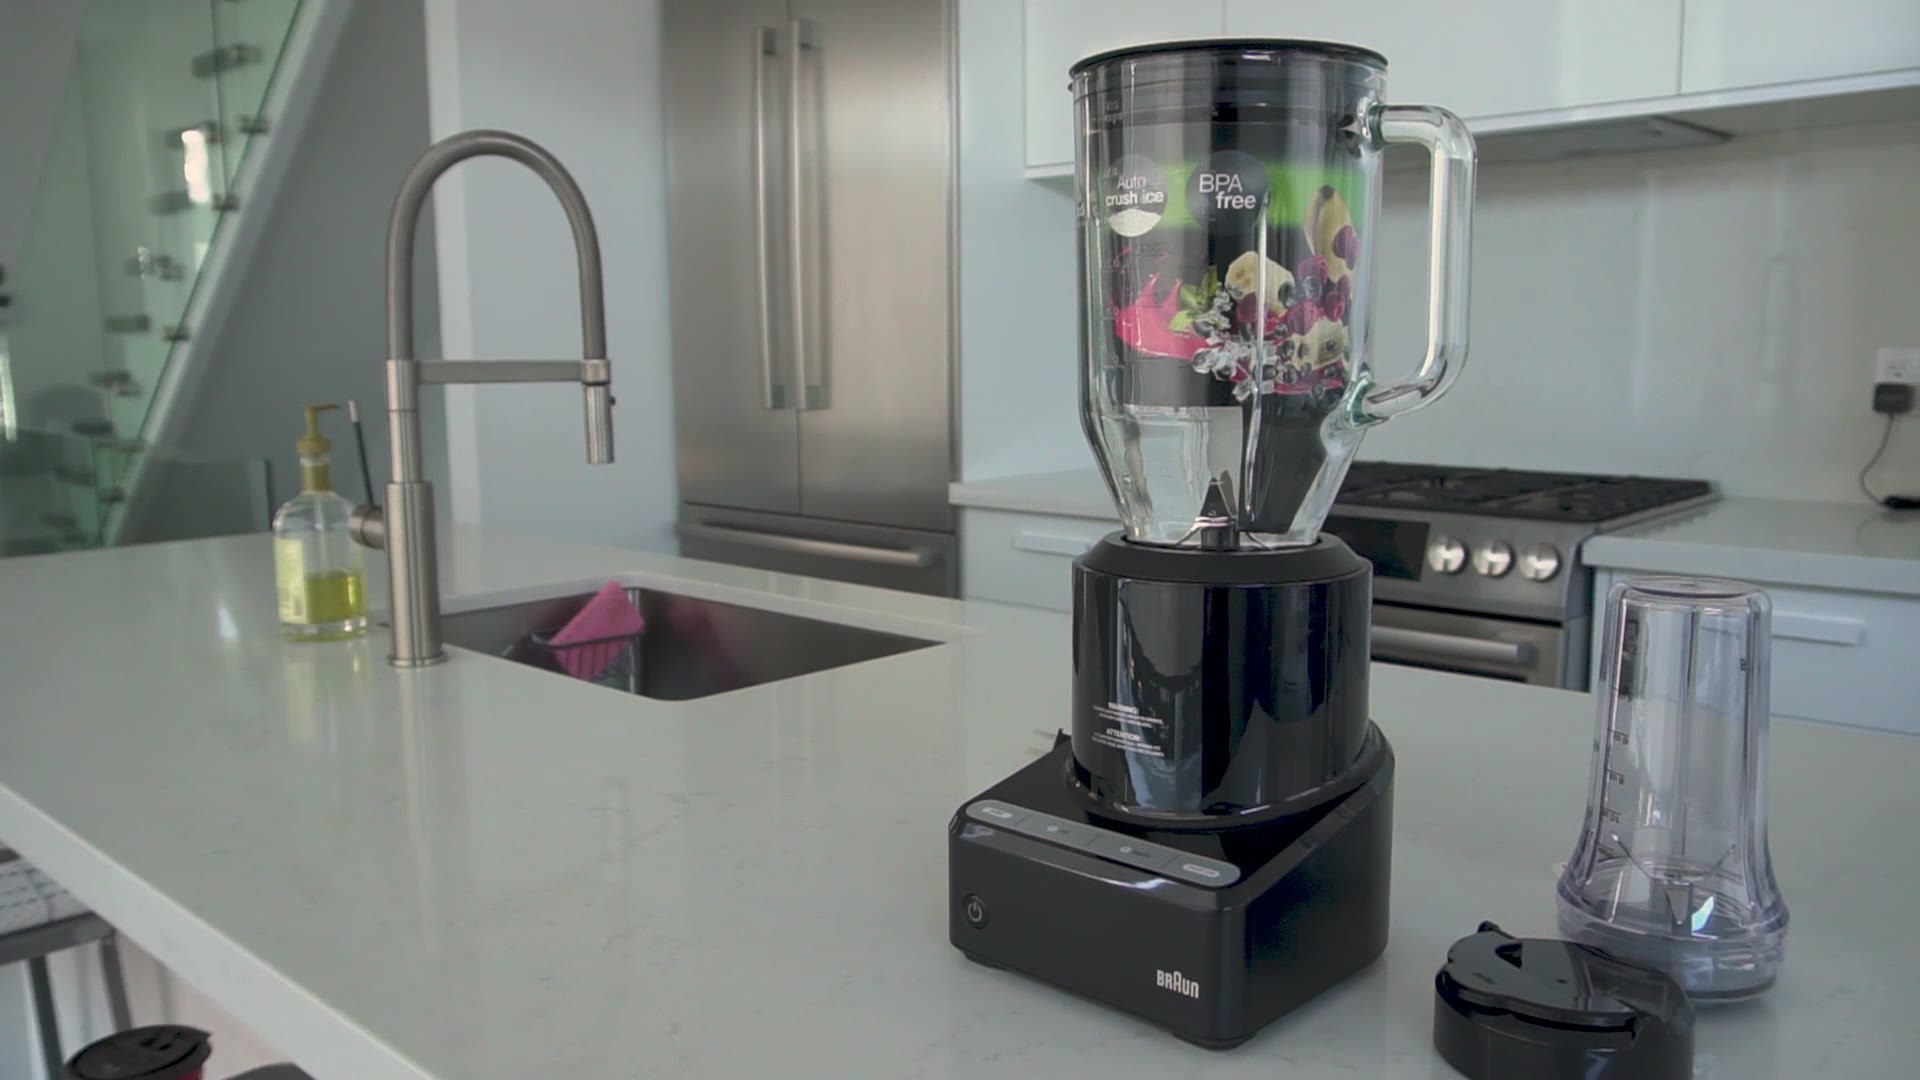 This could be the best blender deal ever recorded. For a link to this deal, visit our station website /waystosave